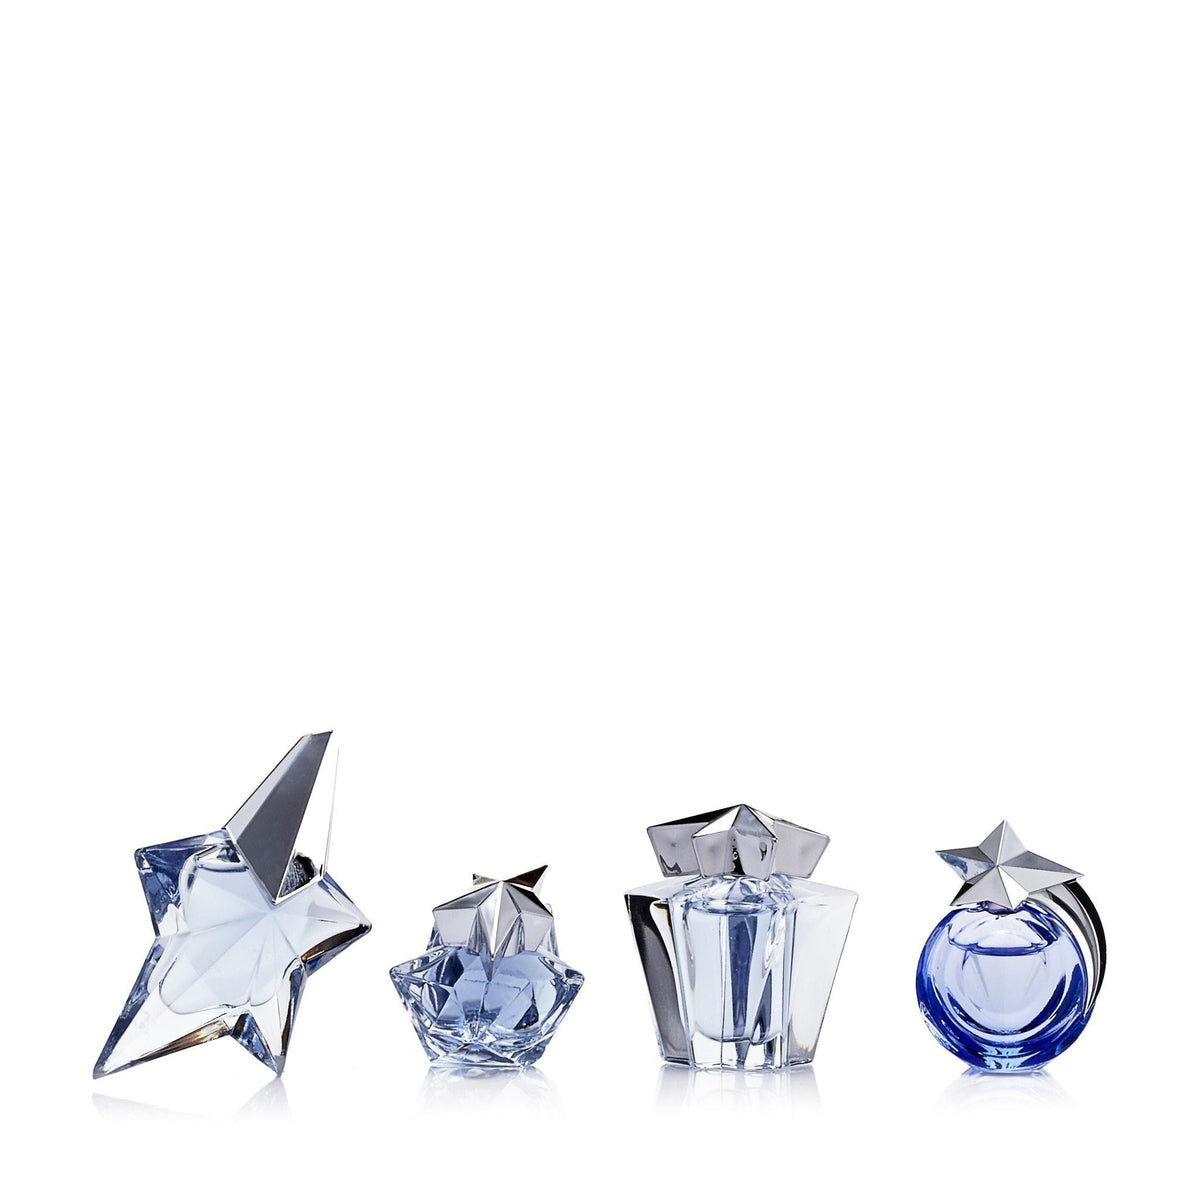 Angel Miniatures for Women by Thierry Mugler